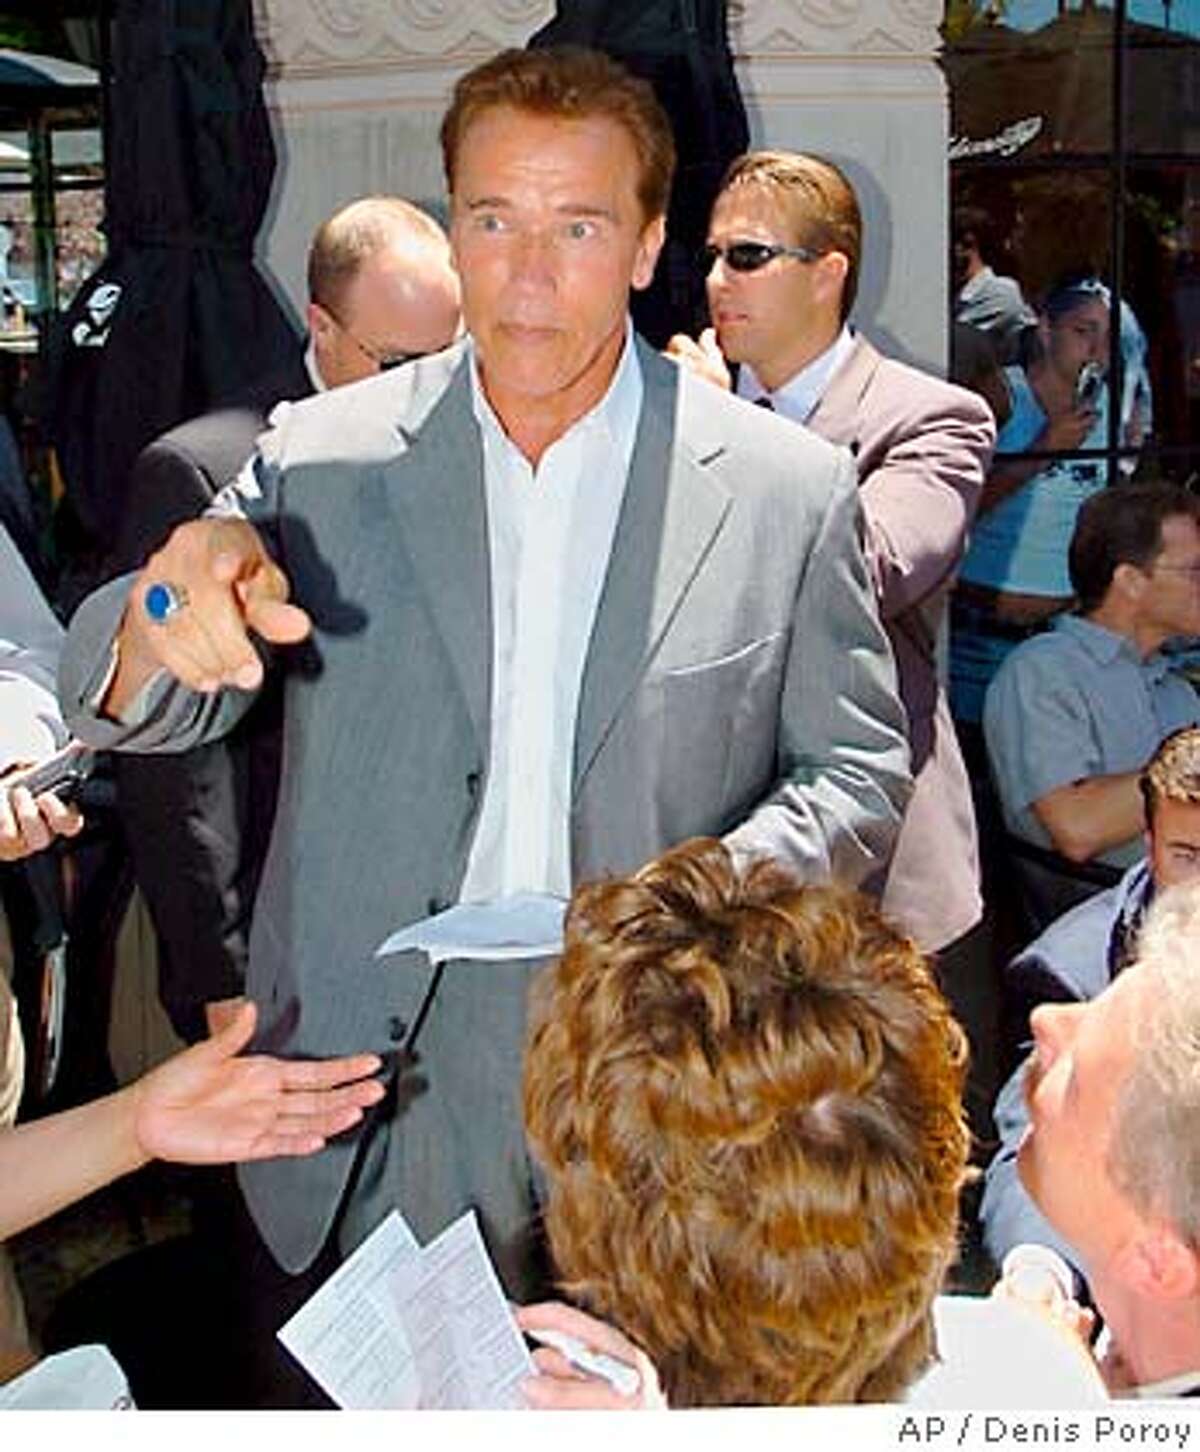 California Gov. Arnold Schwarzenegger talks with patrons as he passes out flyers for his California state budget at the Cheesecake Factory restuarant in San Diego Wednesday, July 21, 2004. (AP Photo/Denis Poroy)